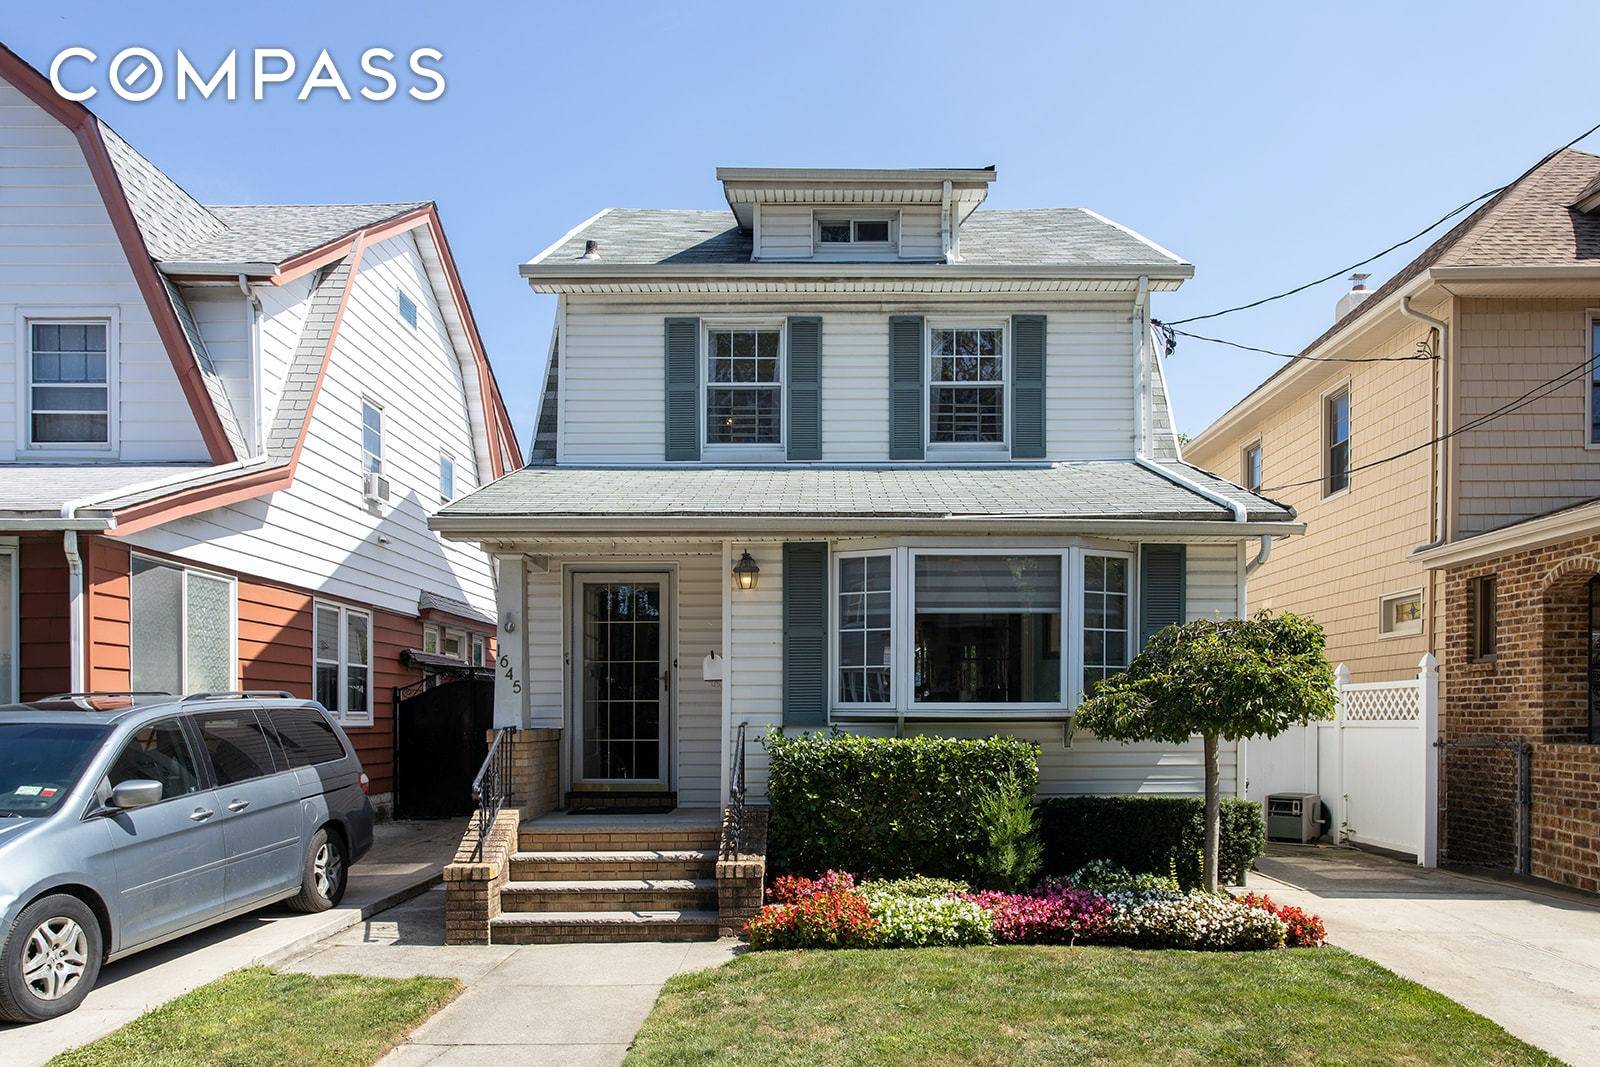 Marine Park Opportunity knocks with a beautiful fully detached one family home 3 bed, 2 bath amp ; fully finished basement plus a private driveway and park like backyard on ...